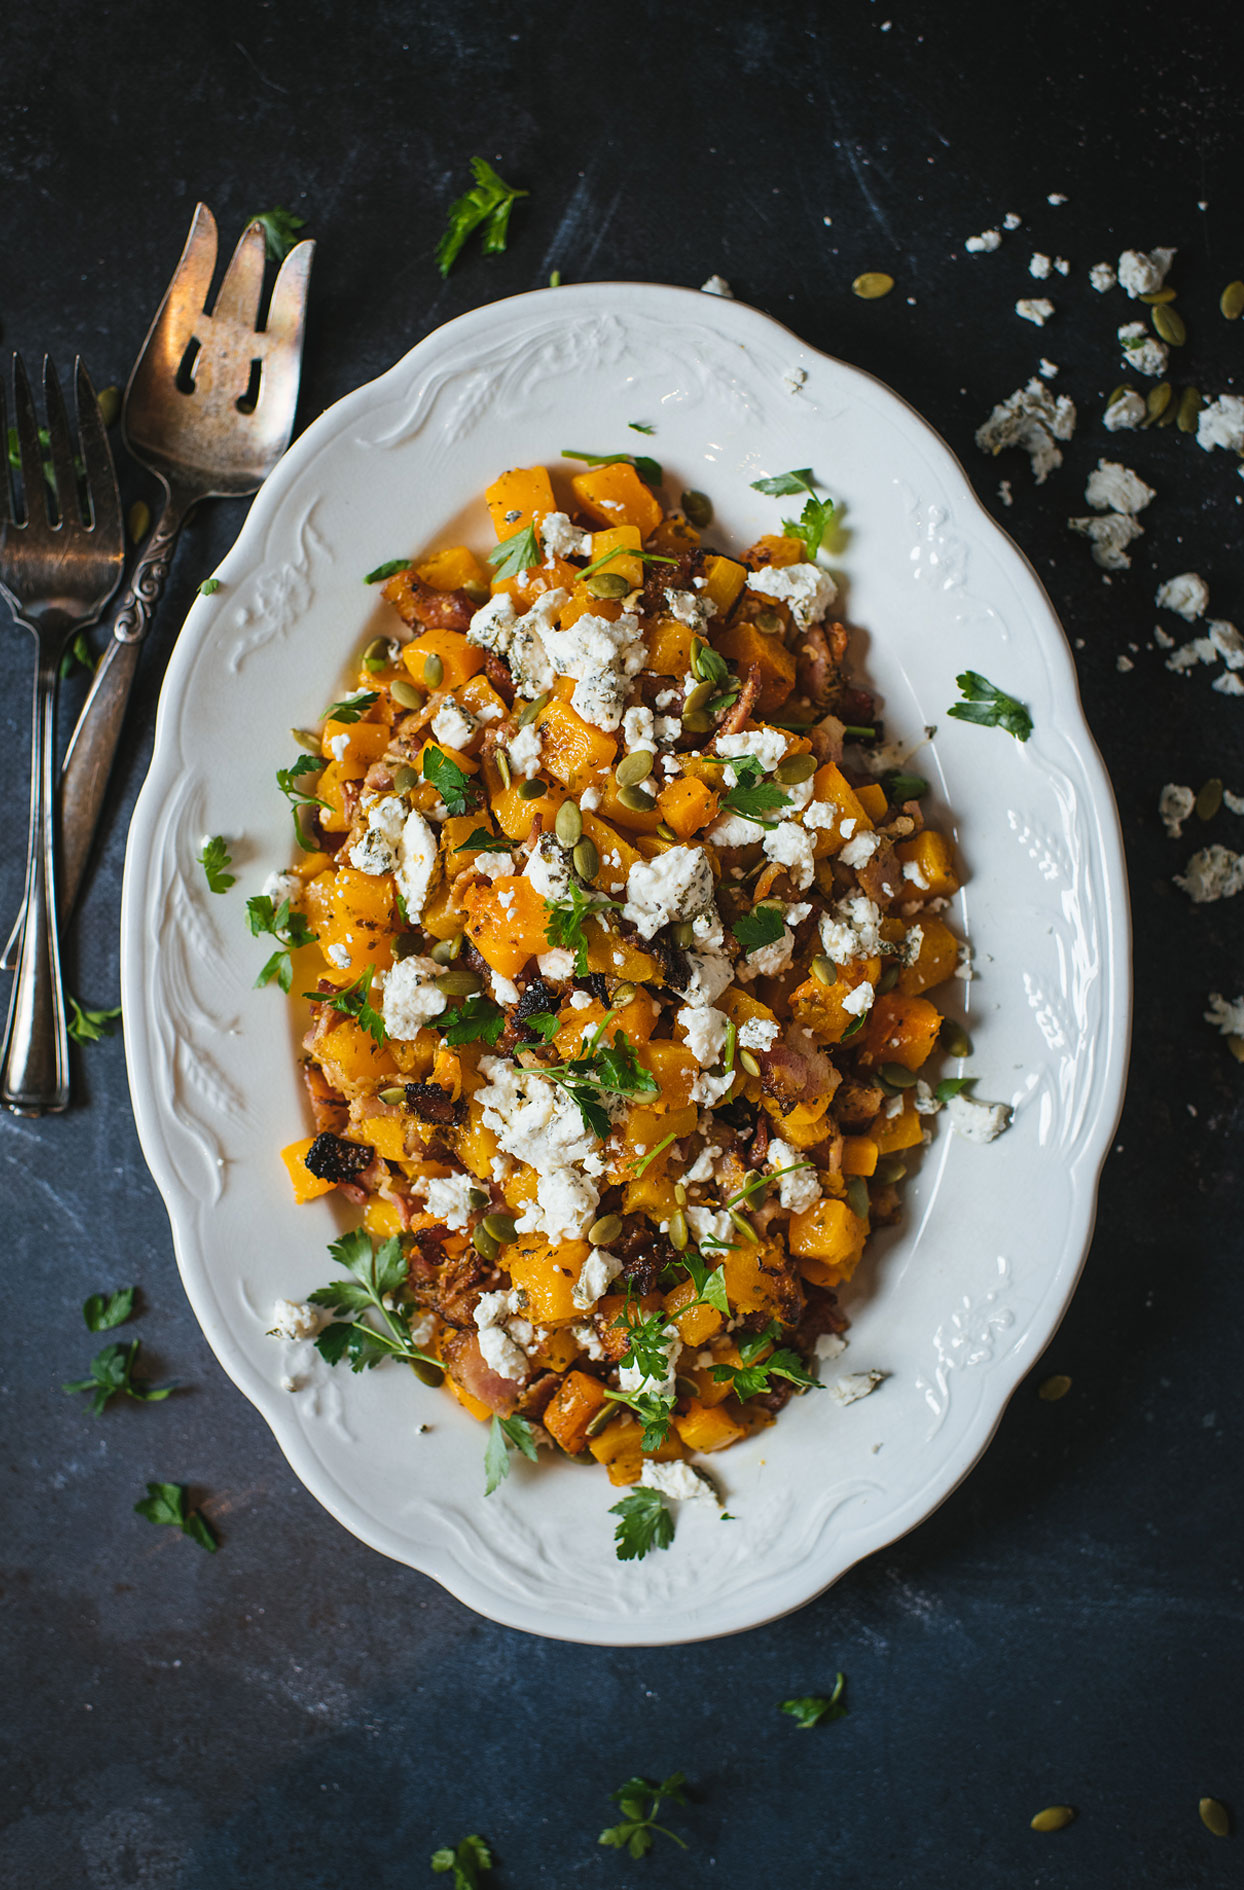 Roasted butternut squash with bacon and goat cheese